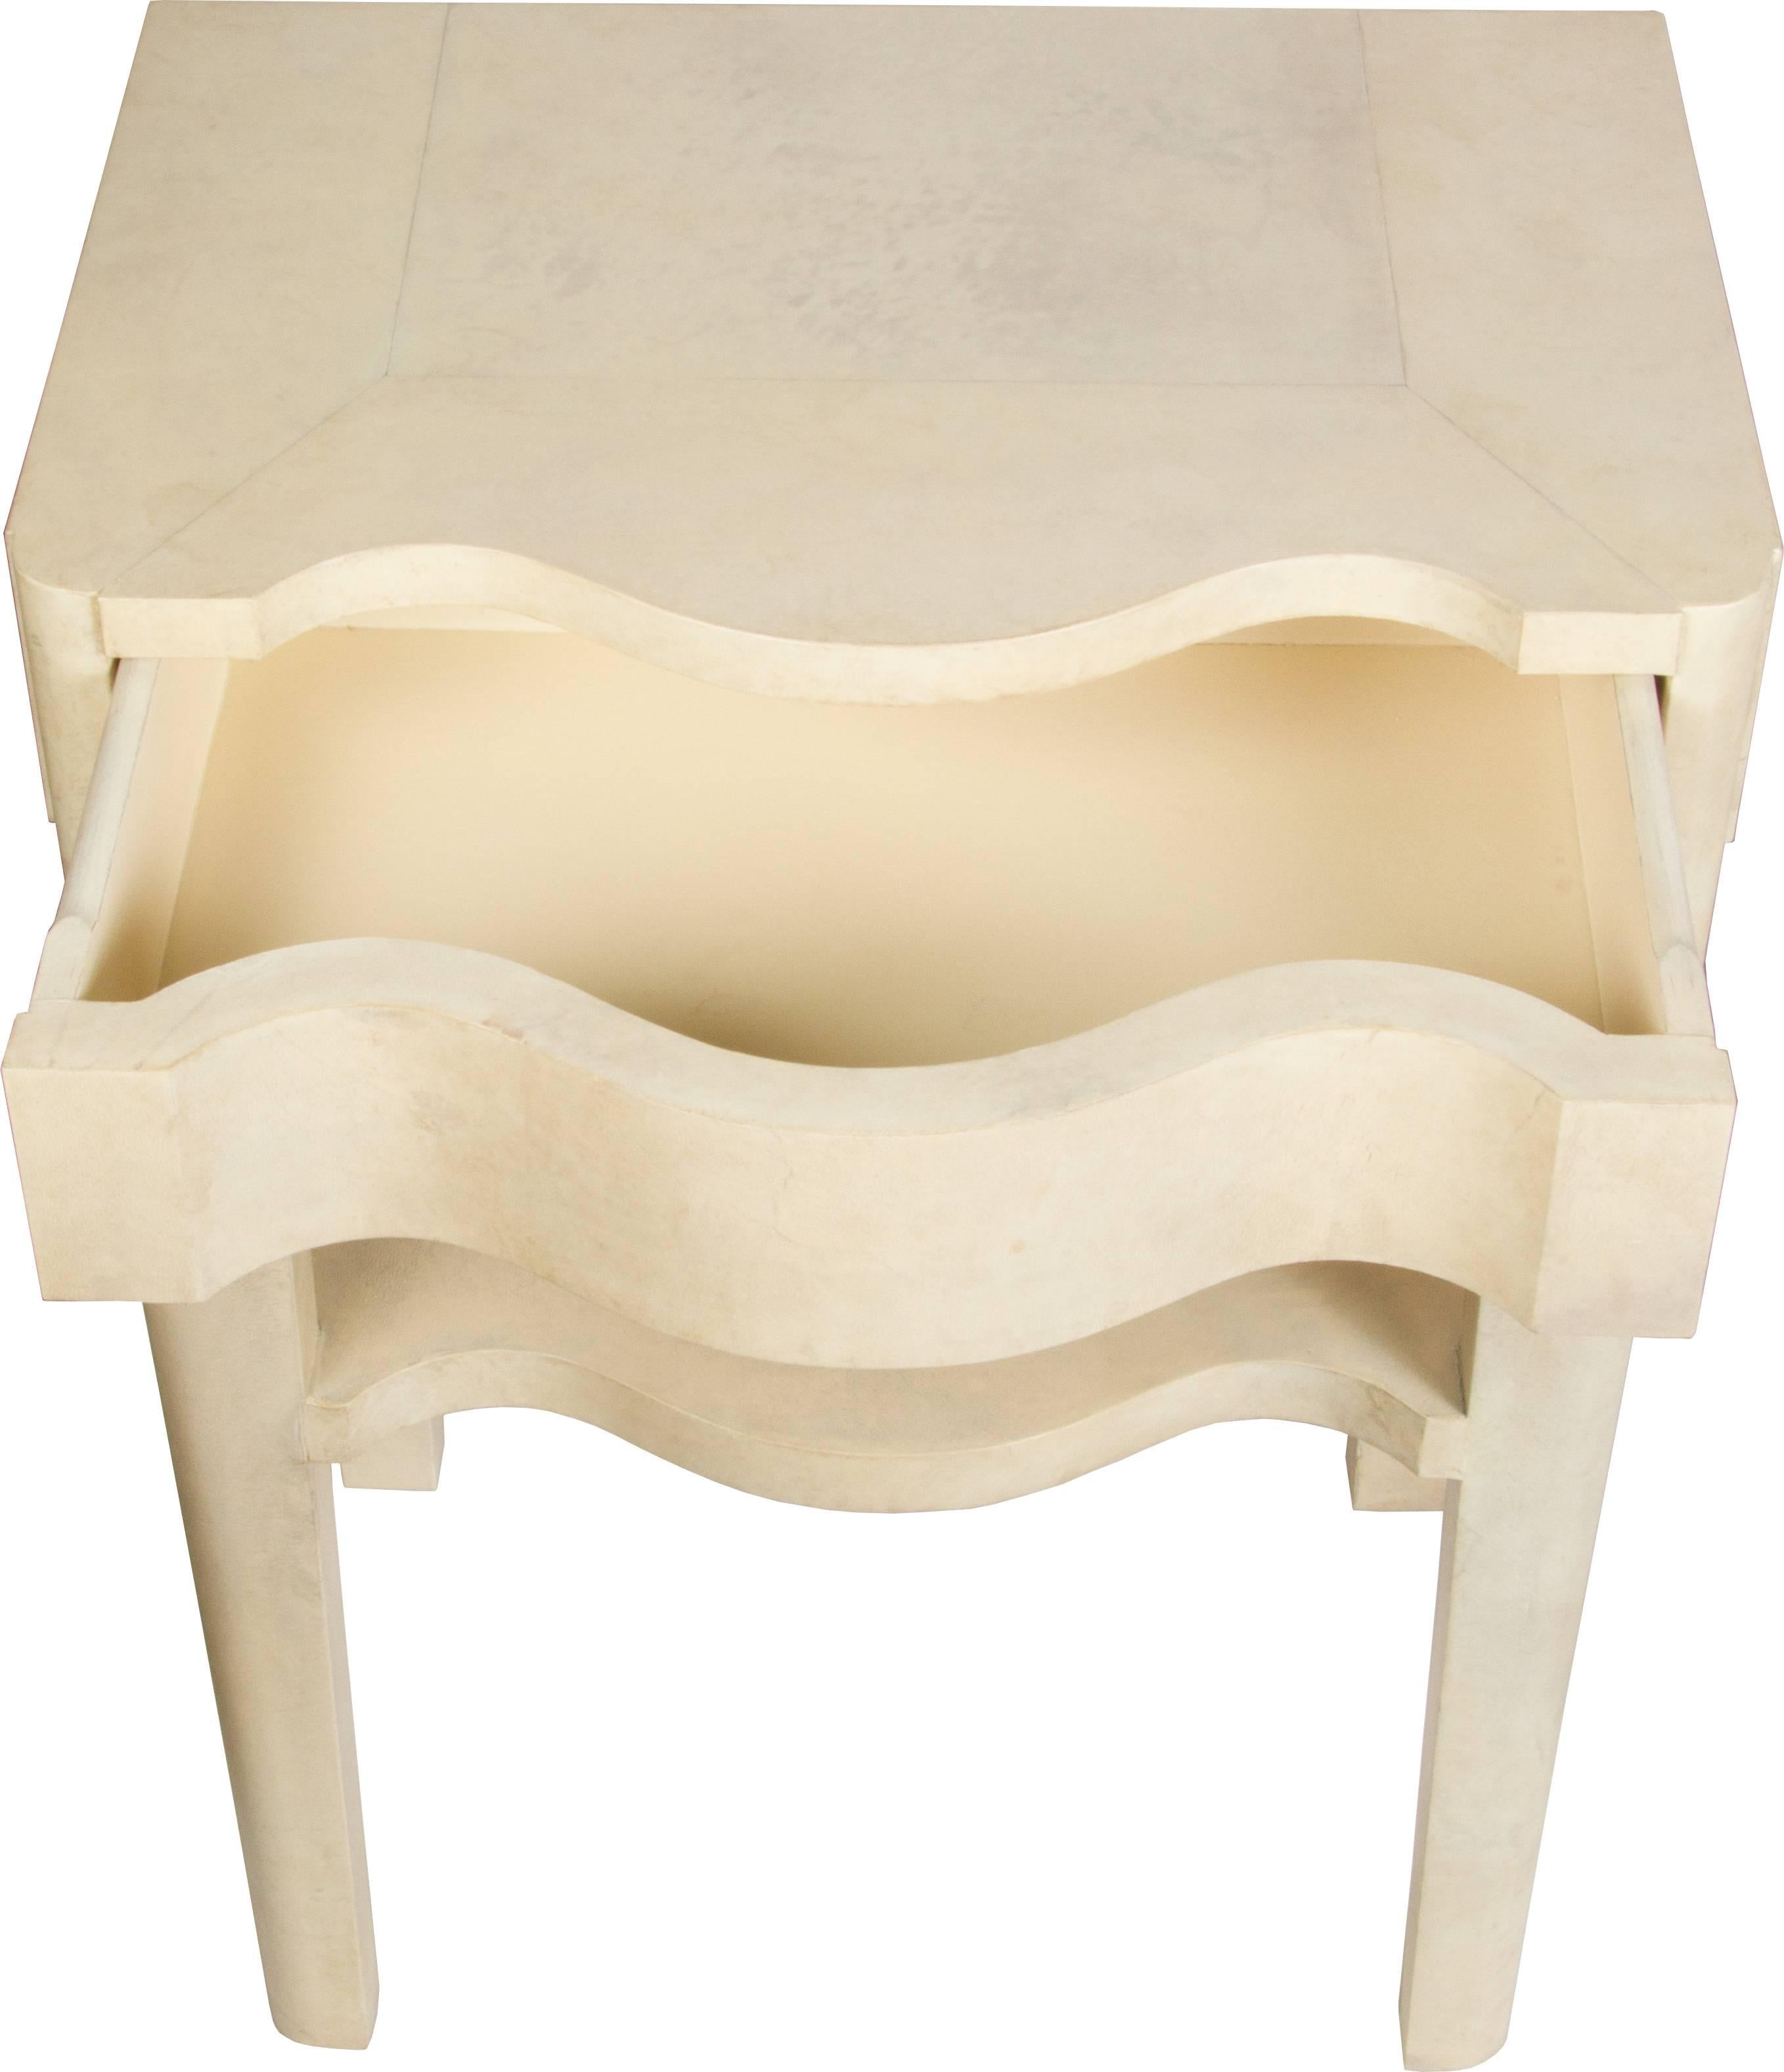 Mid-20th Century Pair of Exceptional Parchment Side Tables or Nightstands by Samuel Marx